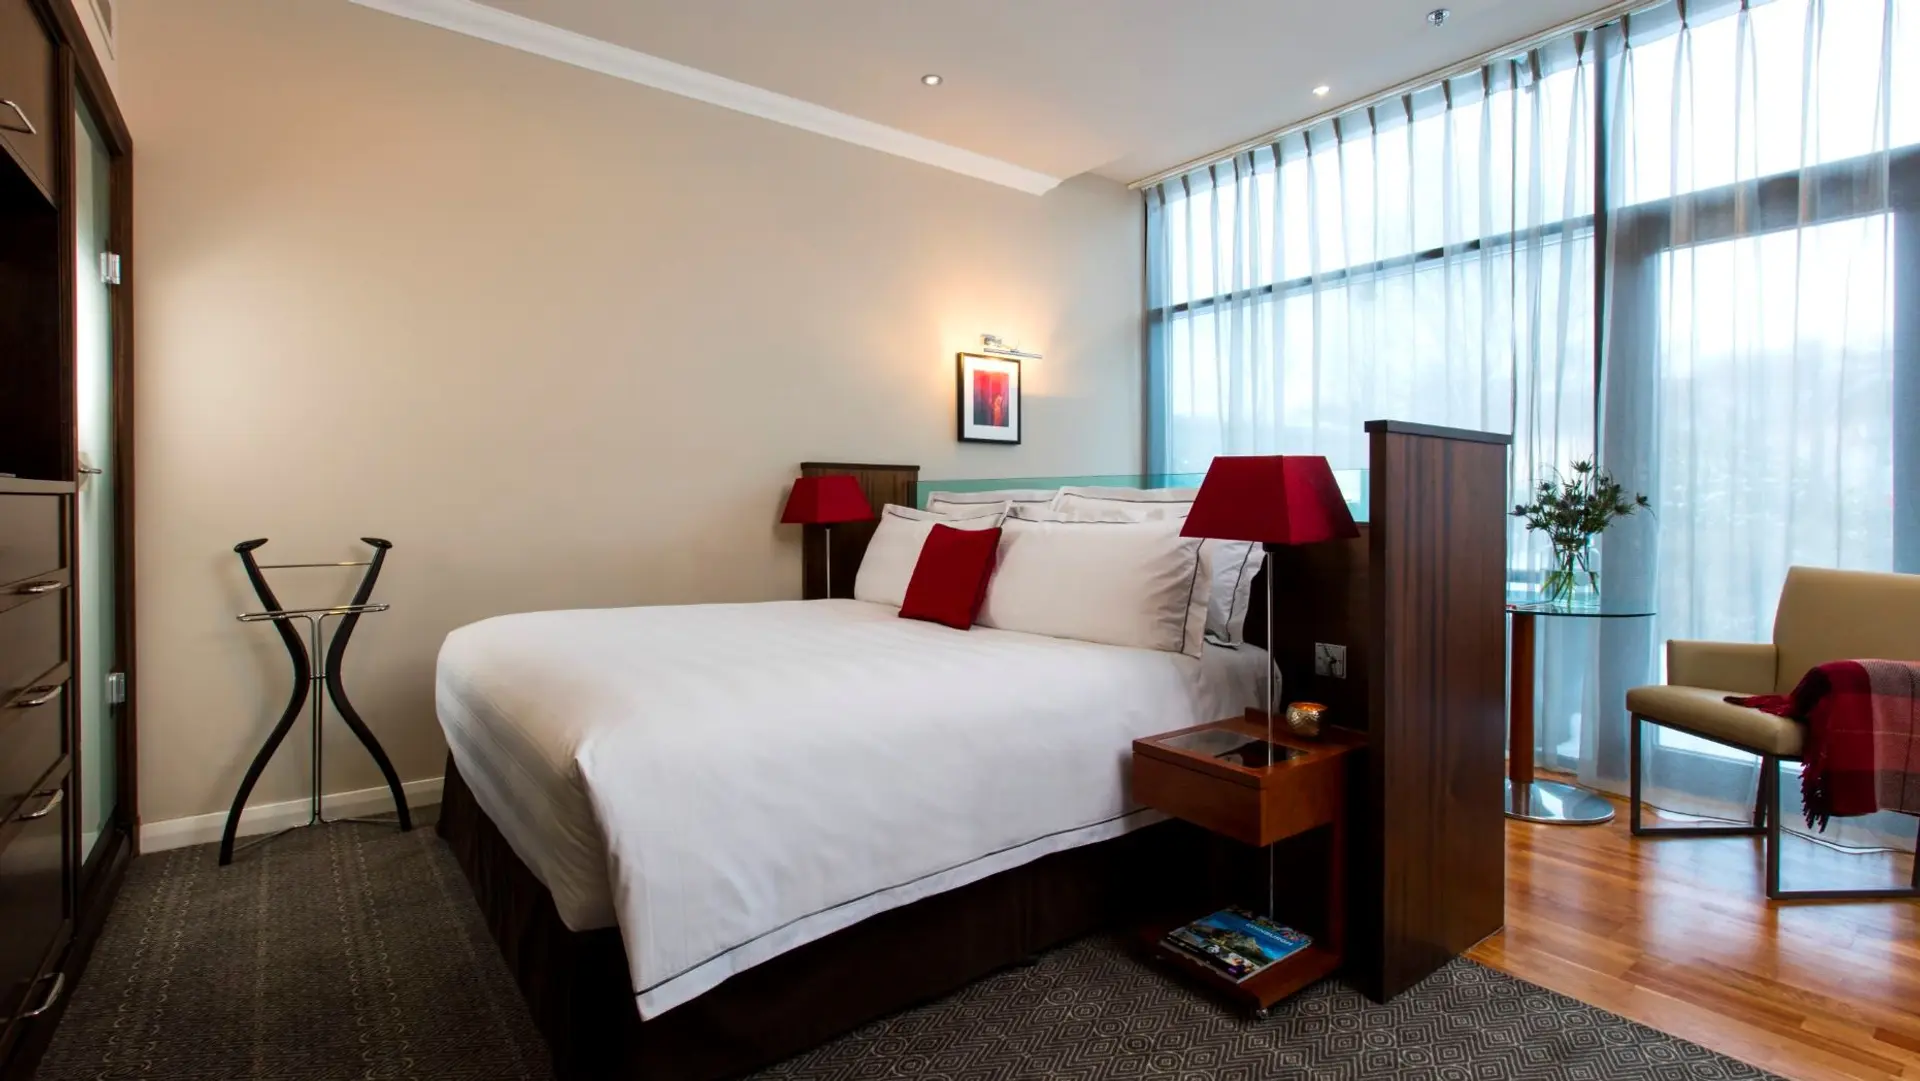 Hotel review Accommodation' - The Glasshouse, Autograph Collection - 0